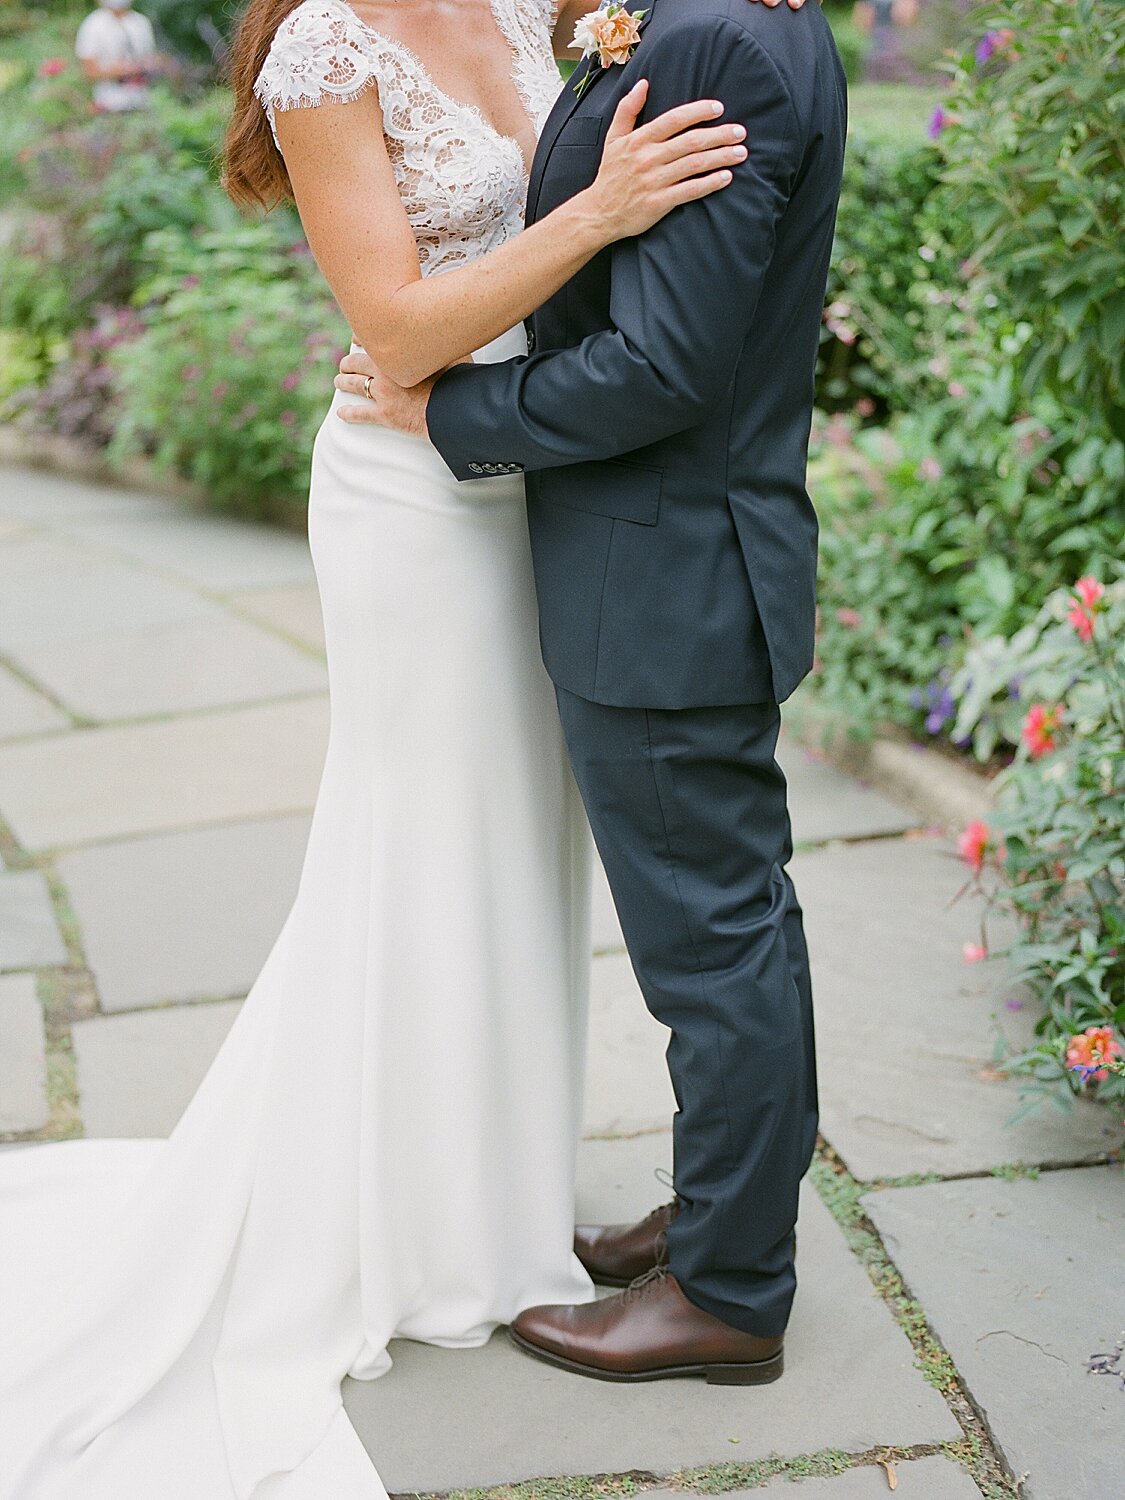 groom holds bride's waist during wedding photos | Asher Gardner Photography | Elopement at the Central Park Conservatory Gardens